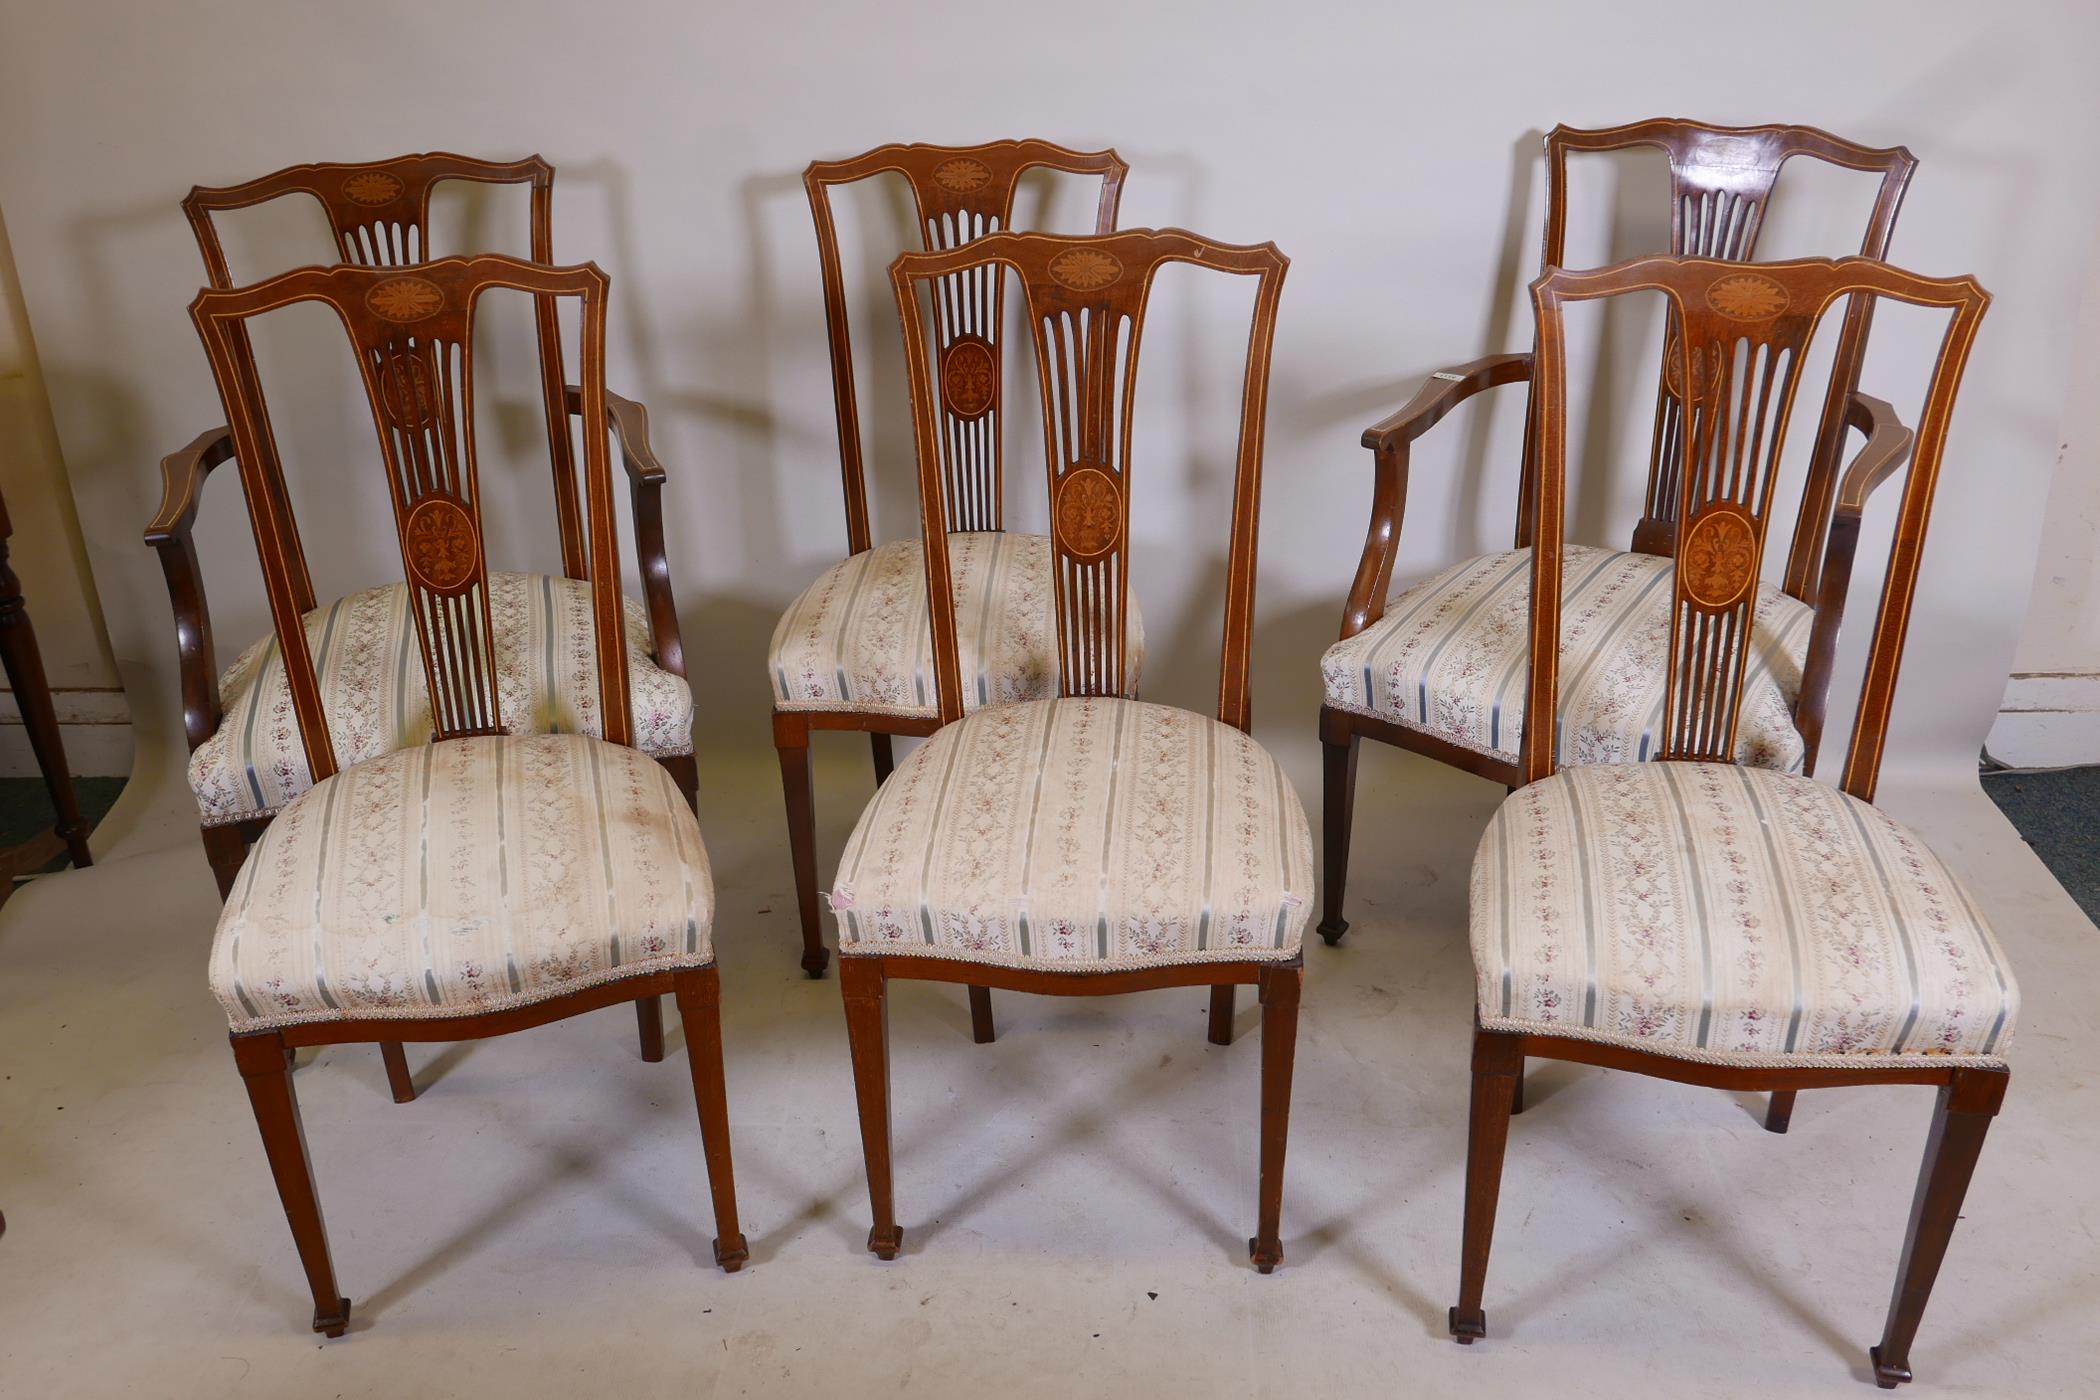 A set of Victorian inlaid mahogany parlour chairs comprising two elbow and four standard chairs